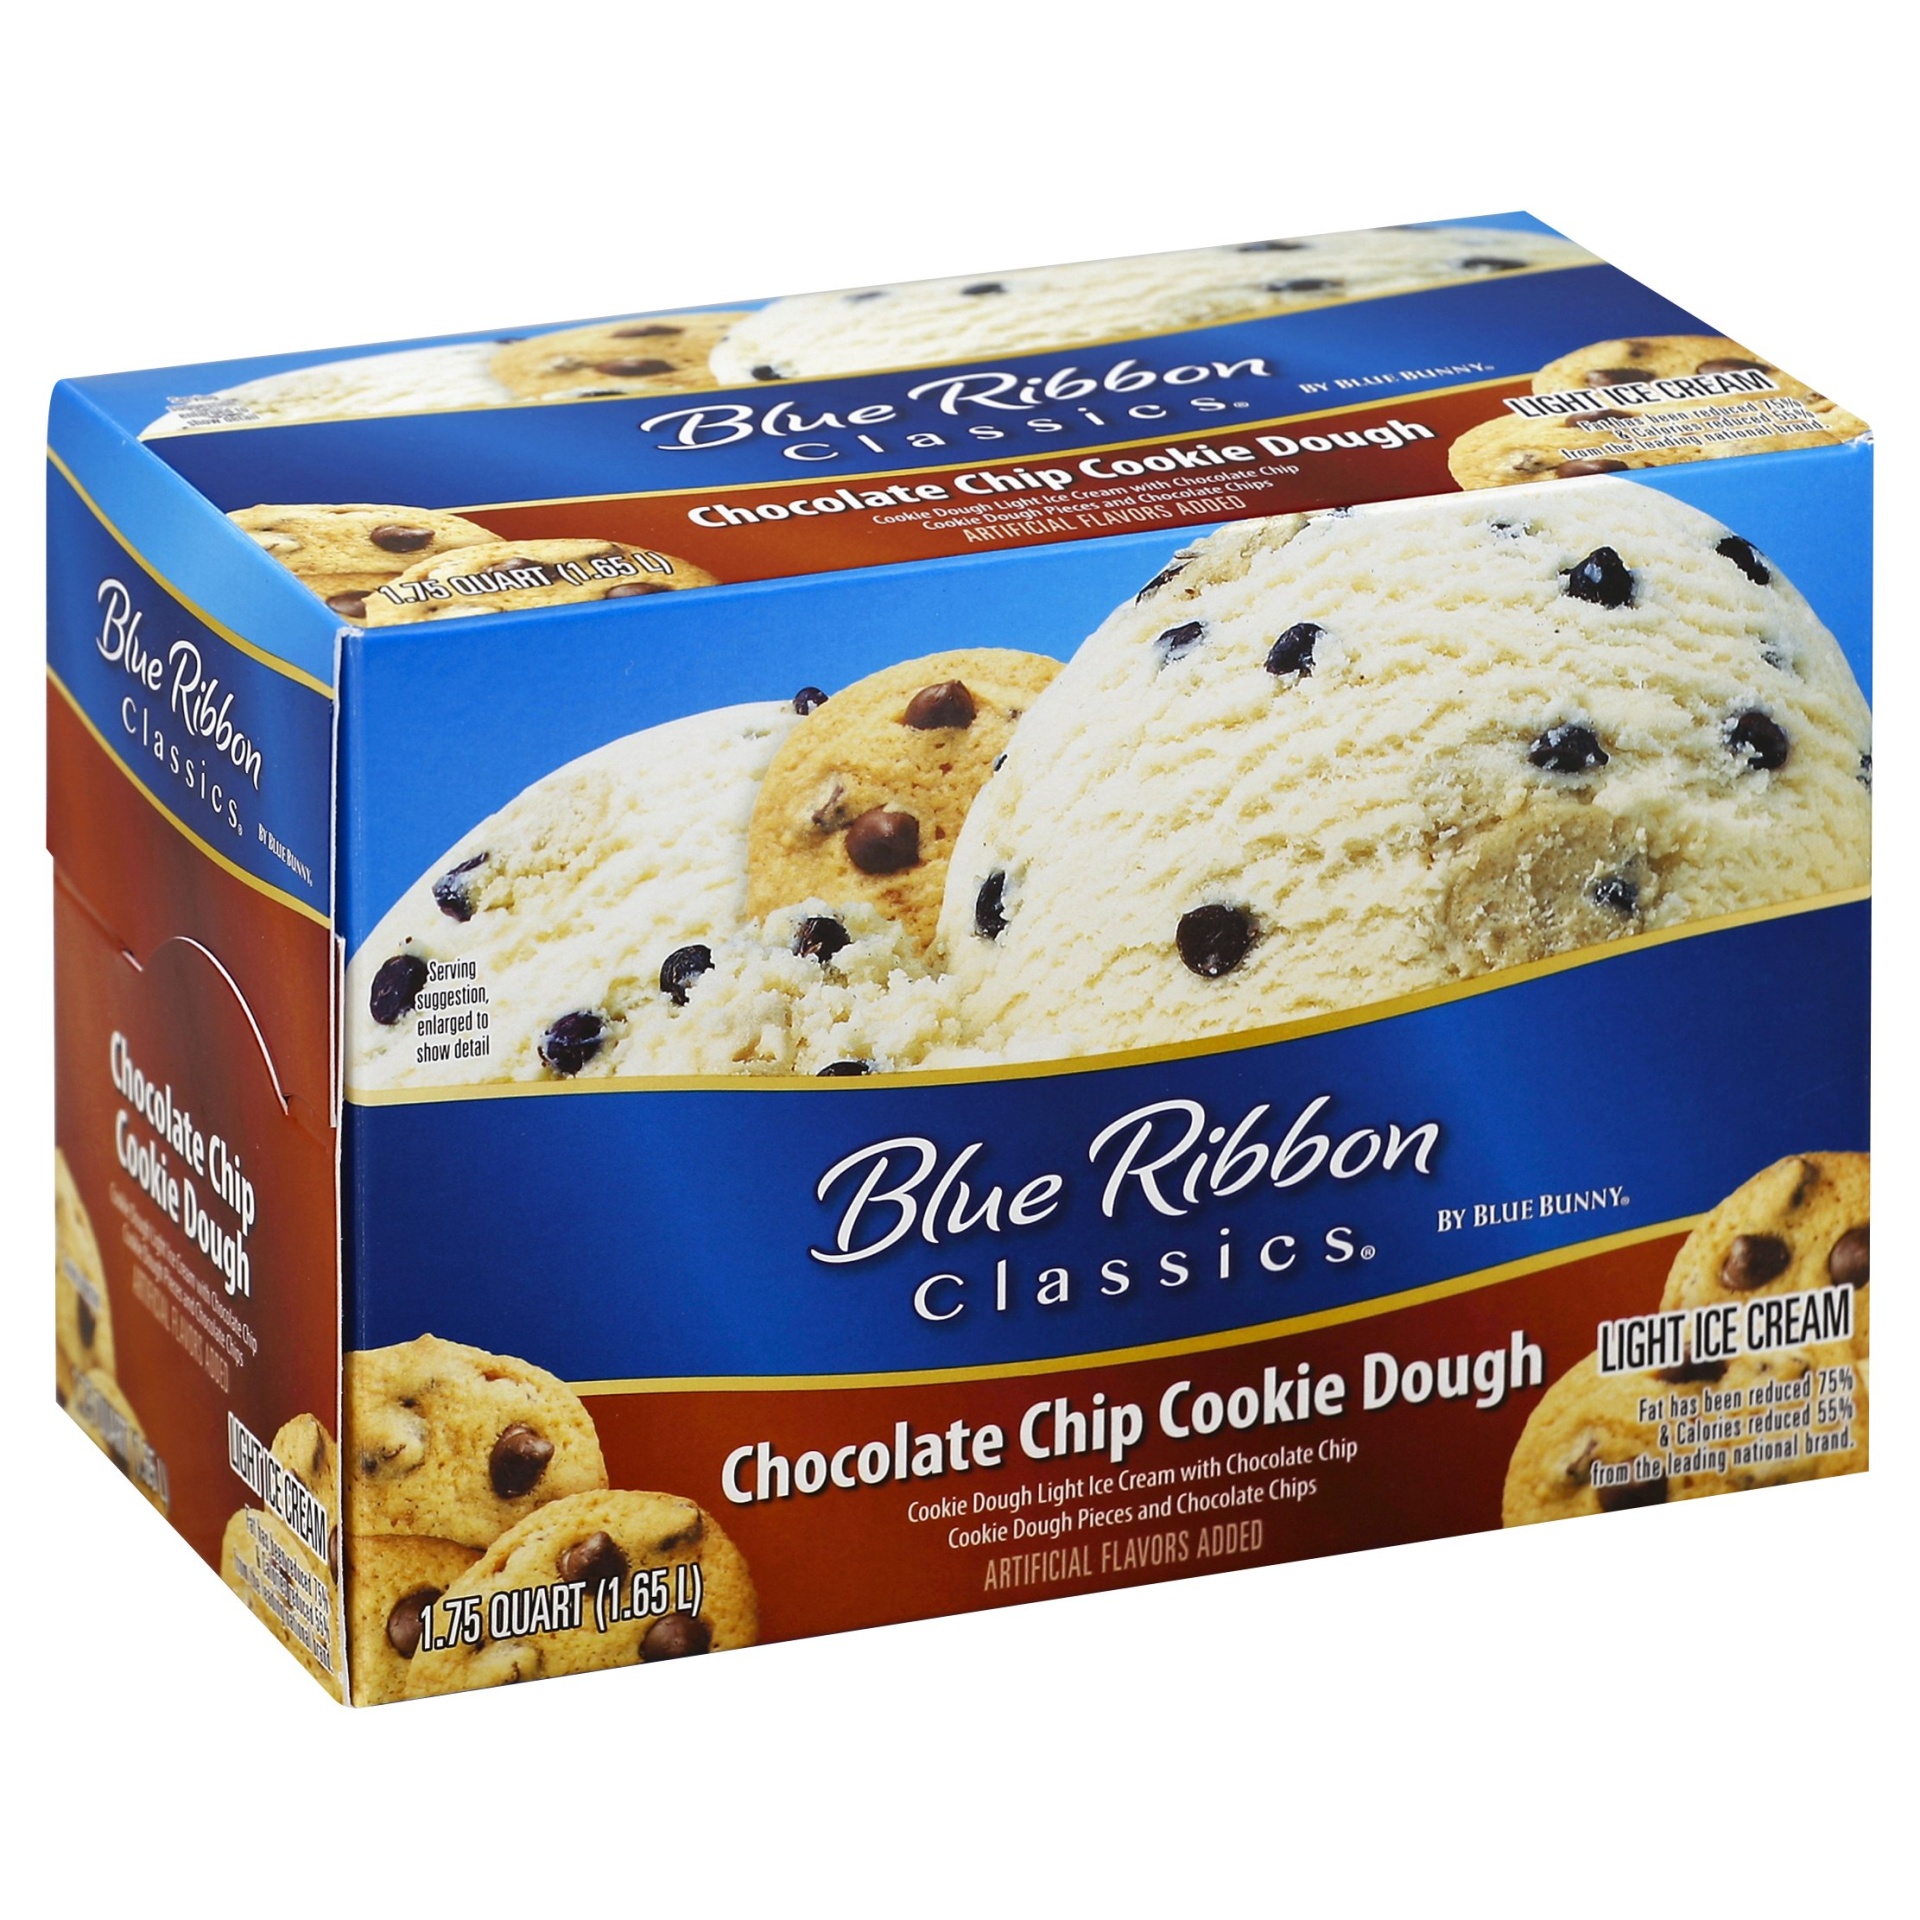 slide 1 of 8, Blue Ribbon Classics by Blue Bunny Chocolate Chip Cookie Dough Light Ice Cream, 1.75 qt